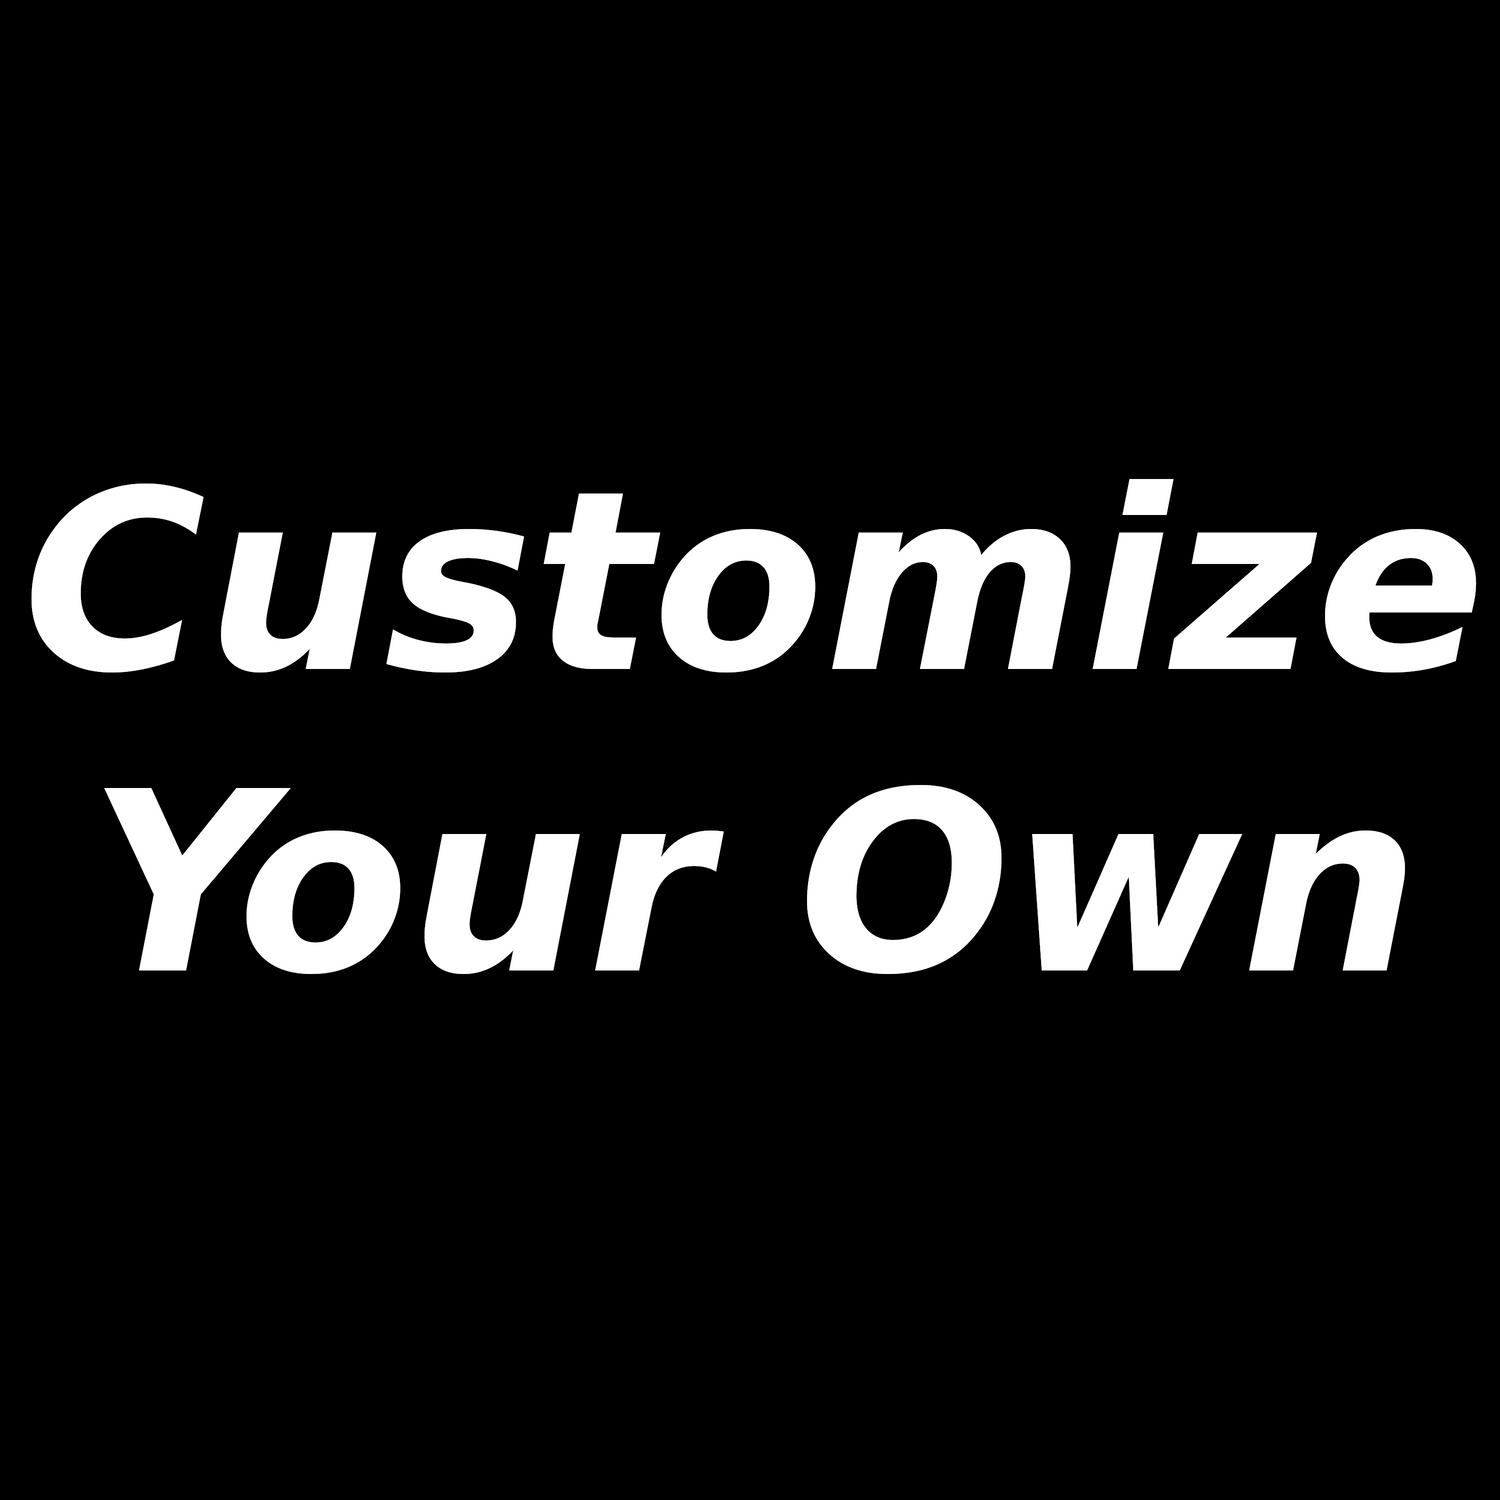 Customize Your Own!